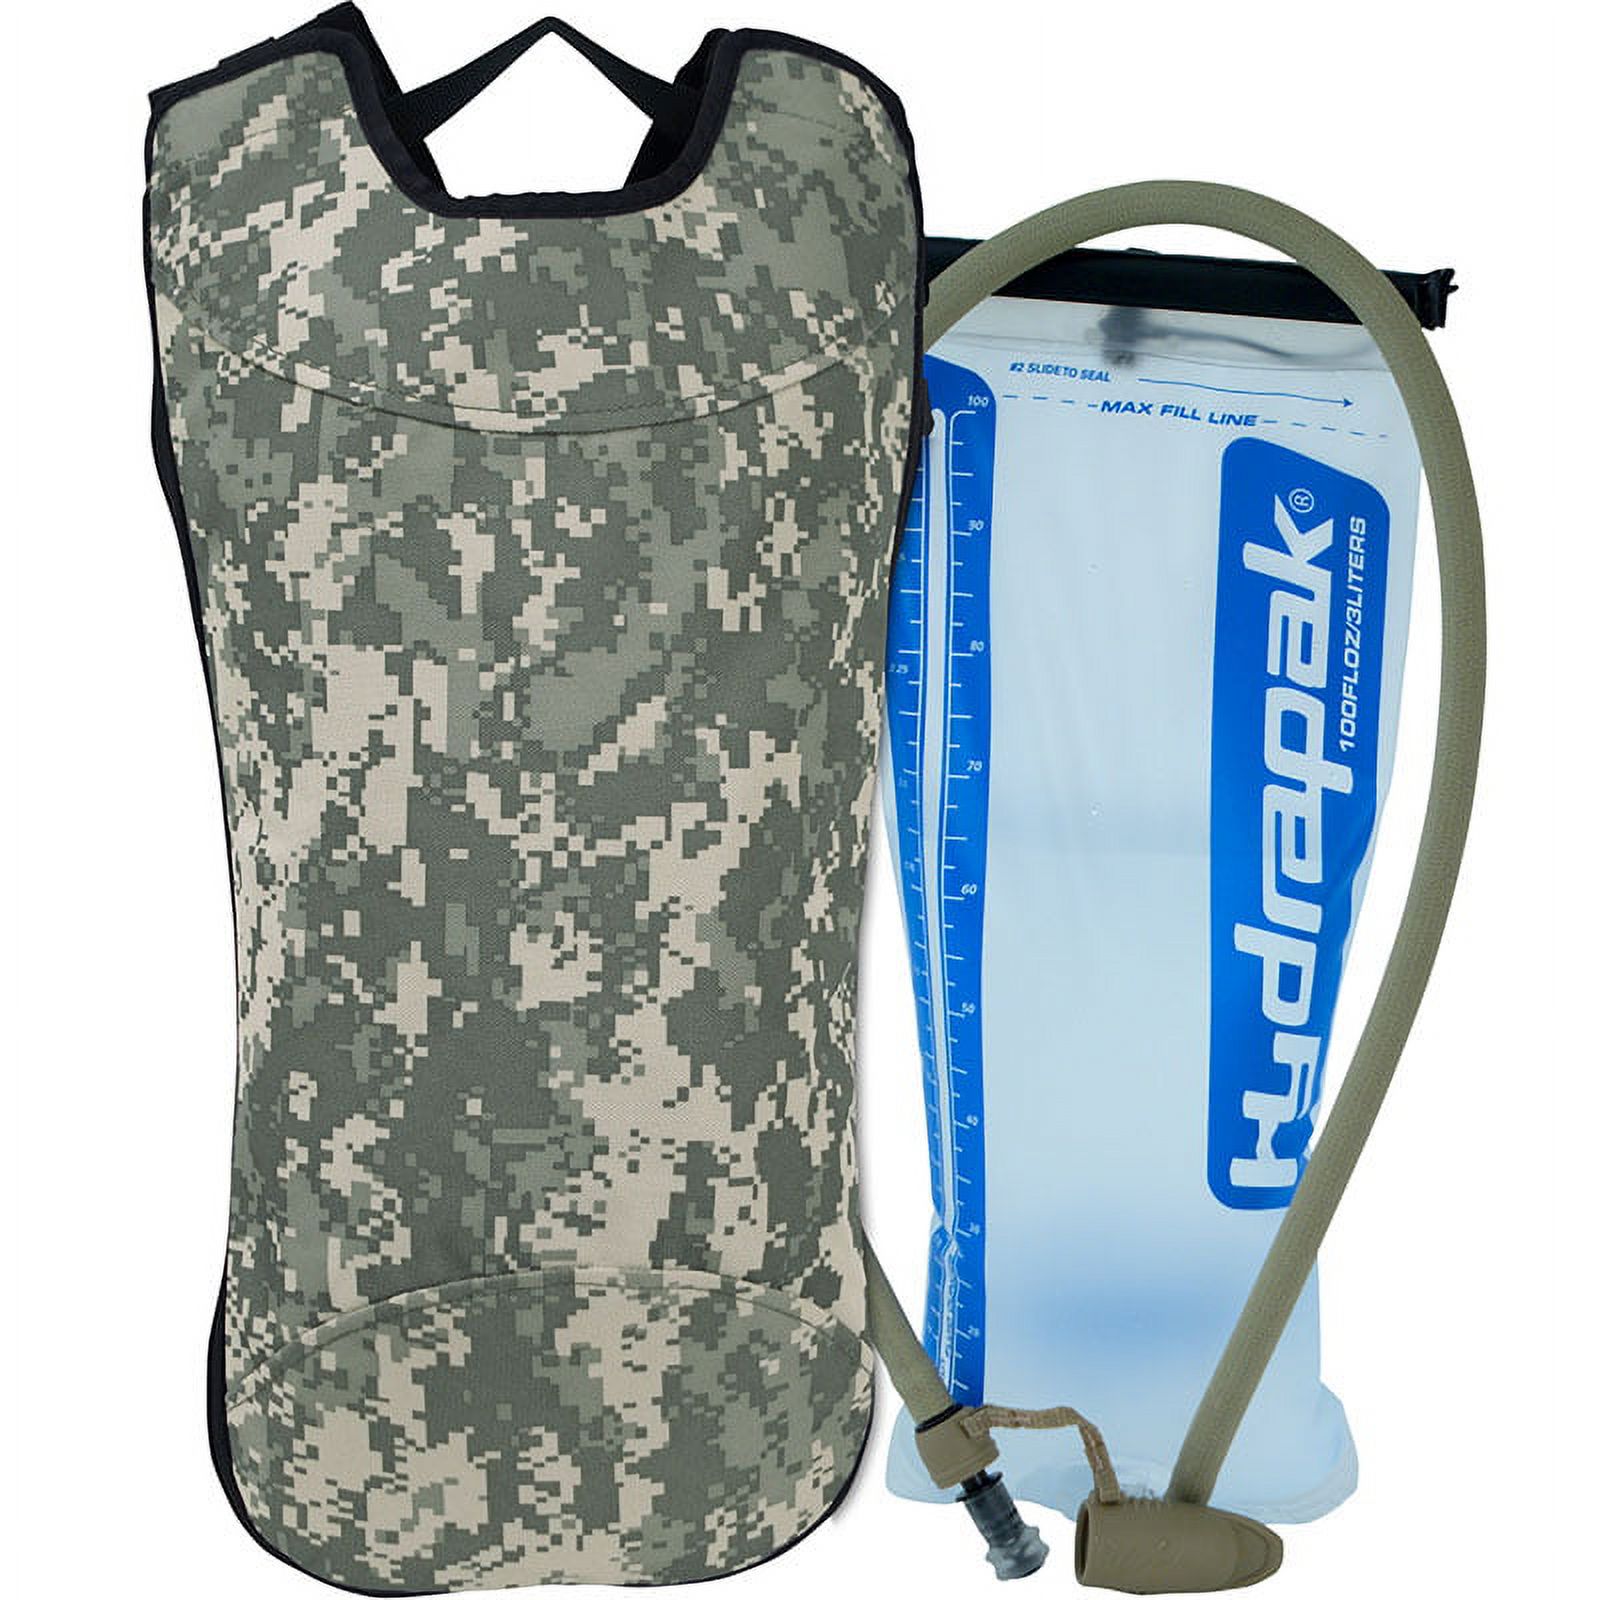 Mercury Tactical Gear Chameleon Hydration Backpack with Hydrapak Reservoir - image 1 of 4